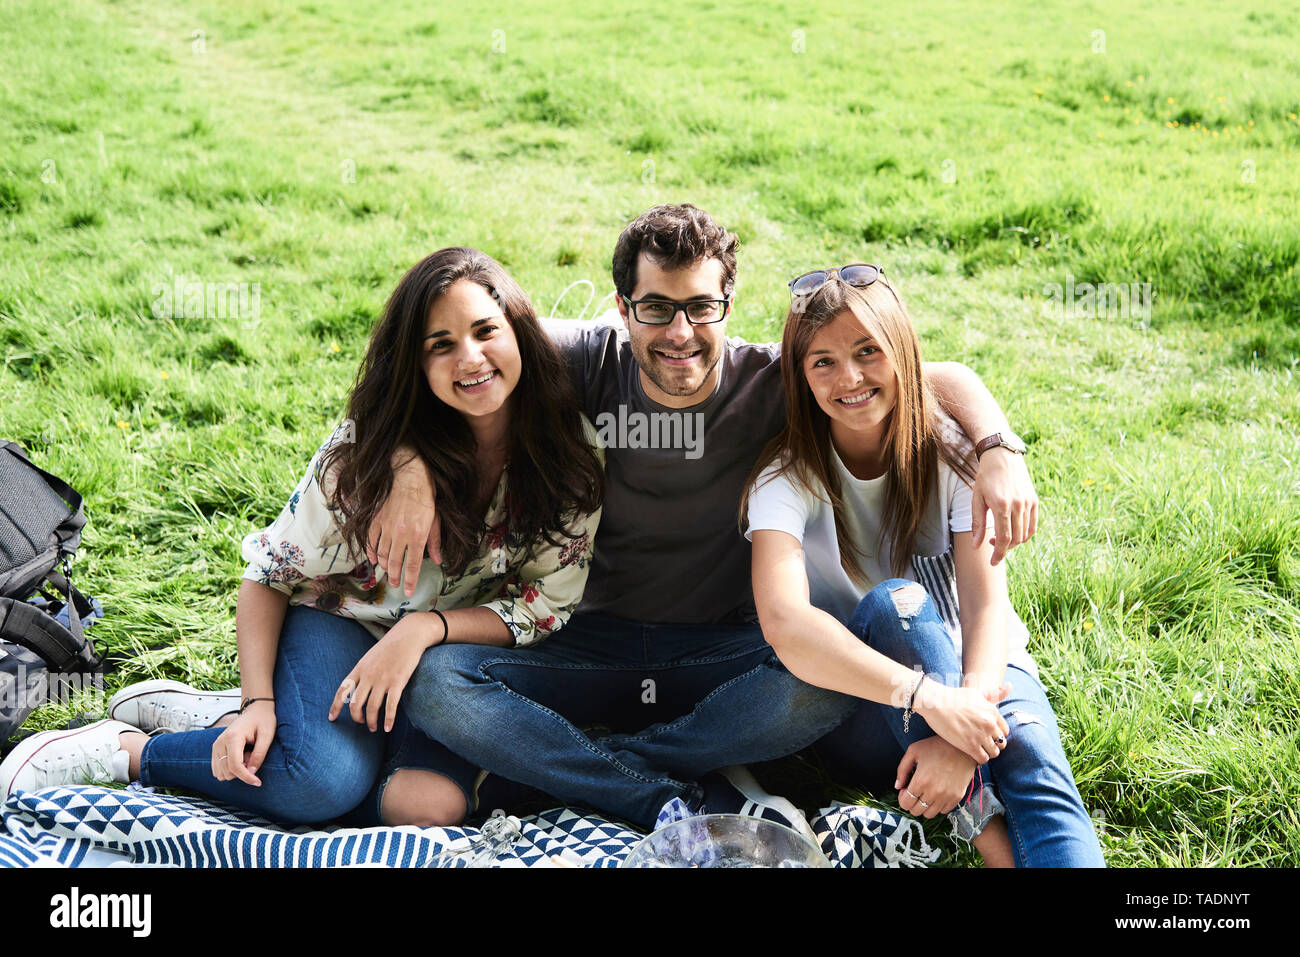 Portrait of smiling friends sitting on a blanket in park Banque D'Images